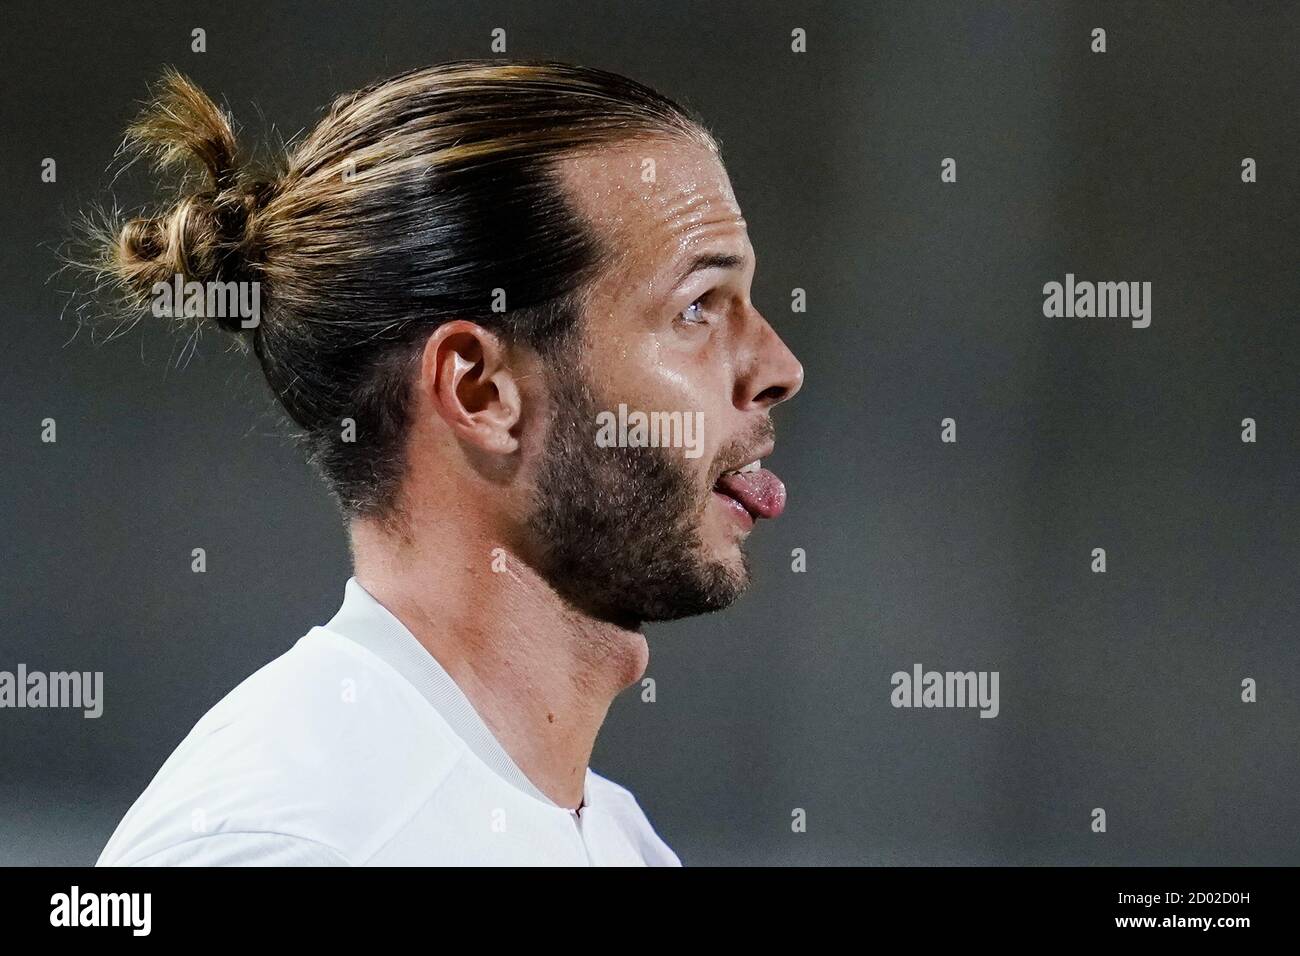 Sandhausen, Germany. 02nd Oct, 2020. Football: 2nd Bundesliga, SV Sandhausen - FC St. Pauli, 3rd matchday, Hardtwaldstadion. Sandhausen's Dennis Diekmeier sticks out his tongue. Credit: Uwe Anspach/dpa - IMPORTANT NOTE: In accordance with the regulations of the DFL Deutsche Fußball Liga and the DFB Deutscher Fußball-Bund, it is prohibited to exploit or have exploited in the stadium and/or from the game taken photographs in the form of sequence images and/or video-like photo series./dpa/Alamy Live News Stock Photo